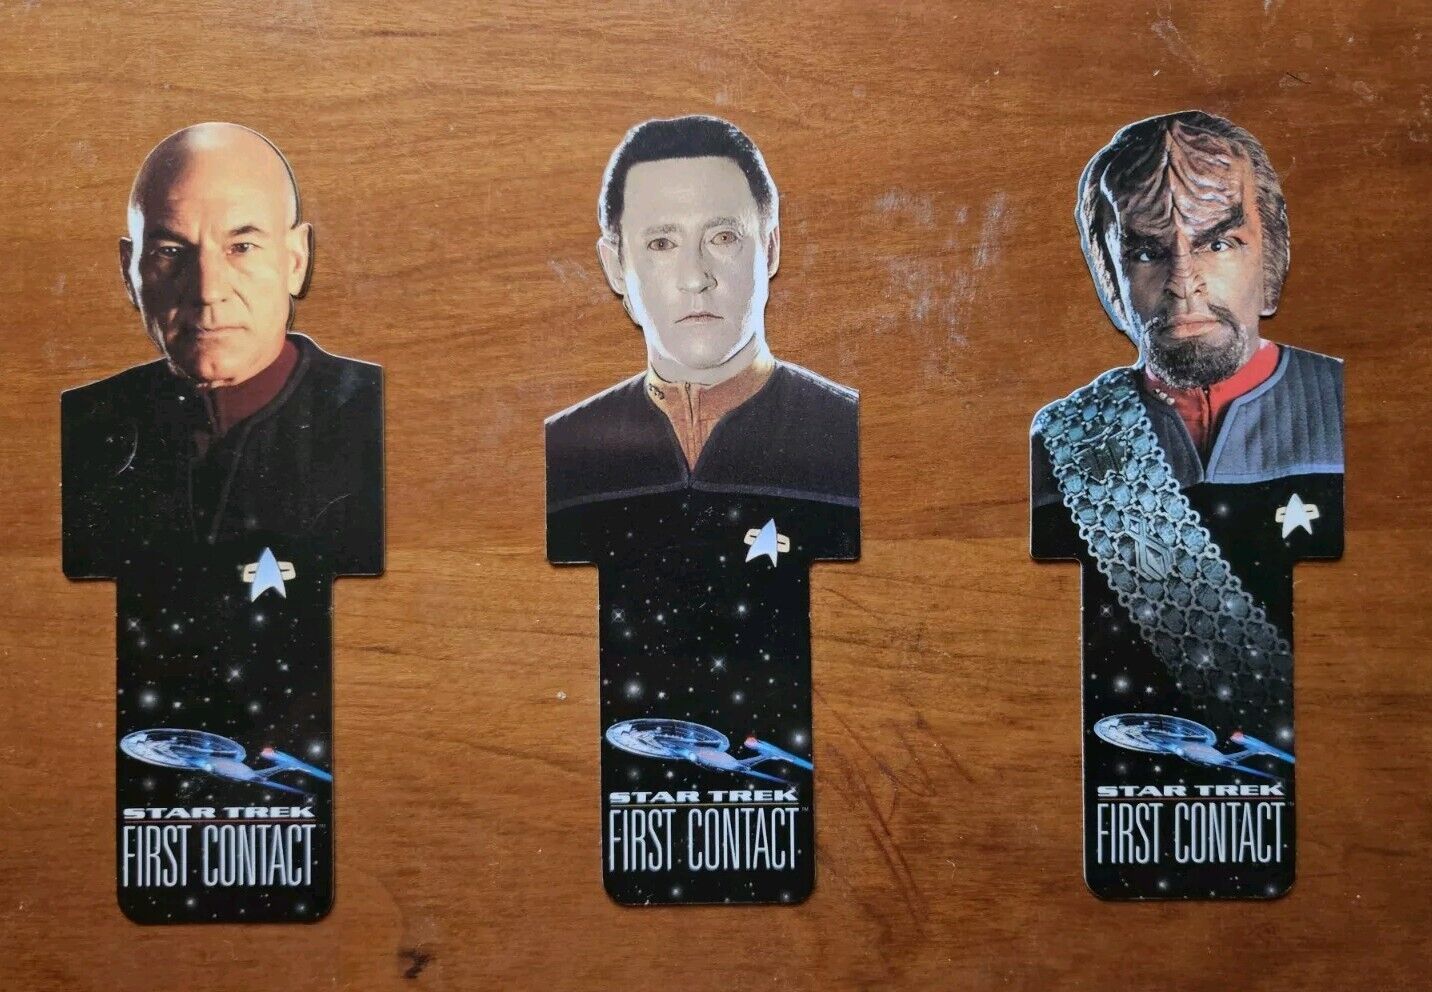 Star Trek First Contact Bookmarks - Lot of 3 - Picard, Data, Worf